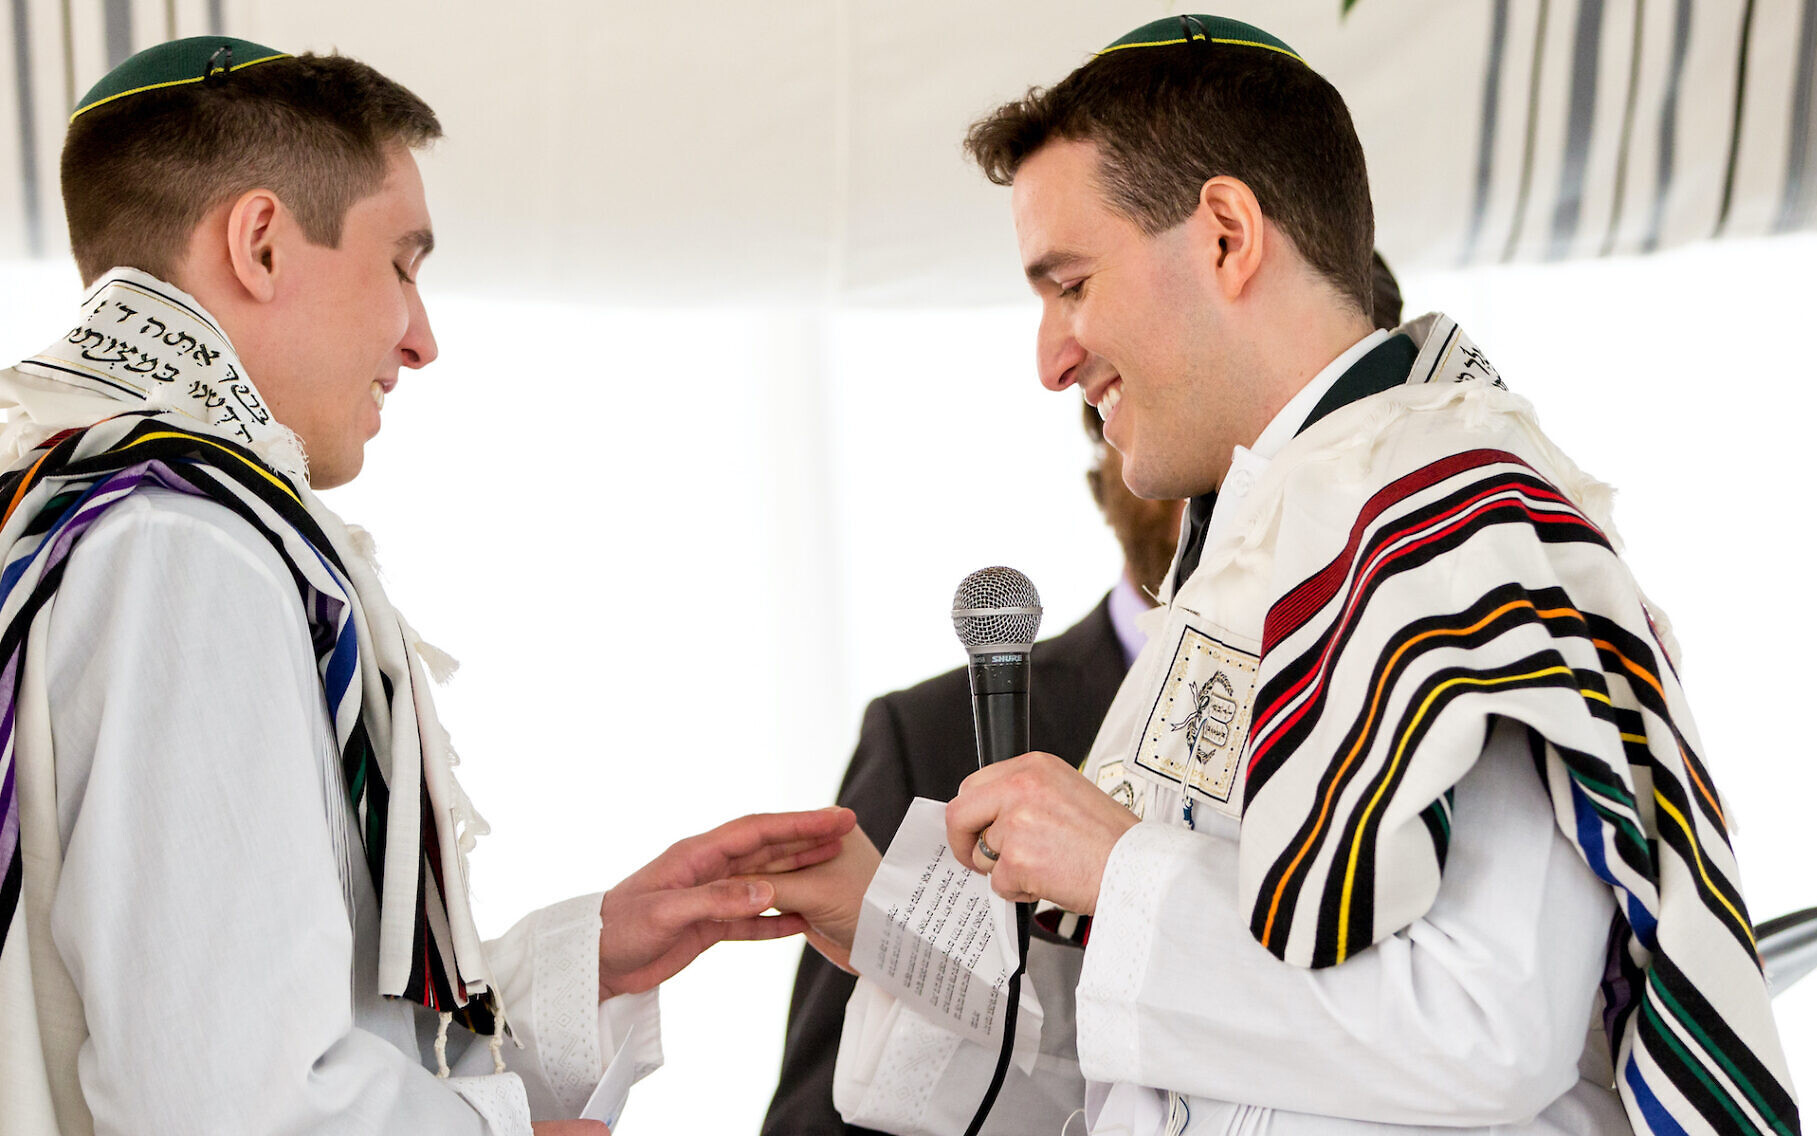 Small but growing number of US Orthodox rabbis officiating same-sex weddings The Times of Israel